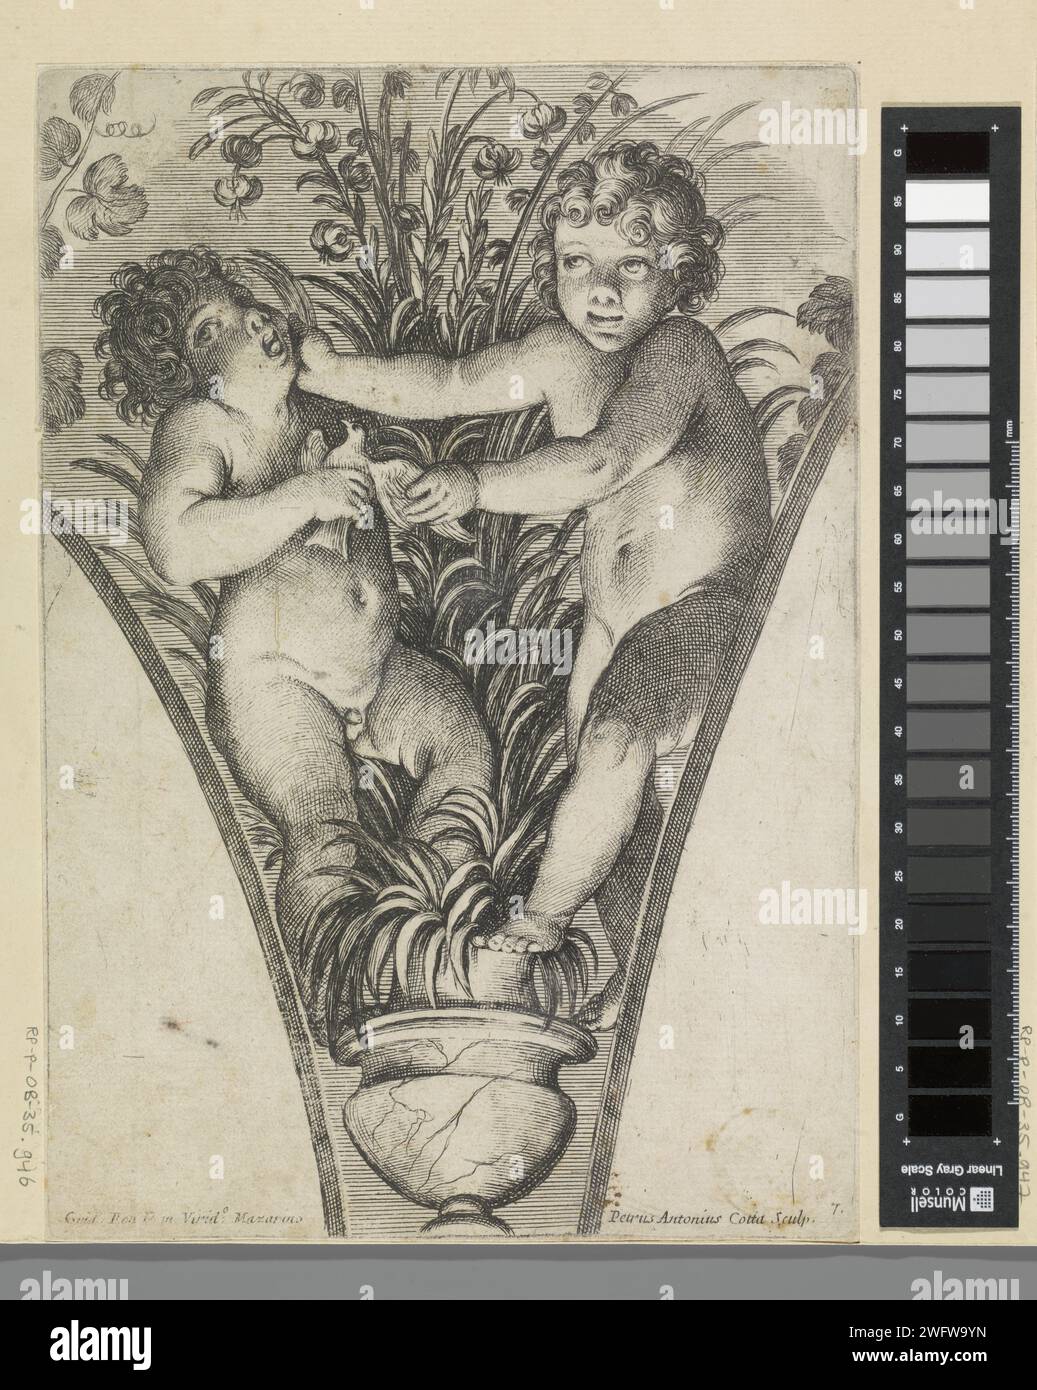 Two putti, fighting for a bird, at a plant in pot, Pietro Antonio Cotta, After Guido Reni, 1675 - 1685 print  Italy paper etching cupids: 'amores', 'amoretti', 'putti'. potted plants Stock Photo